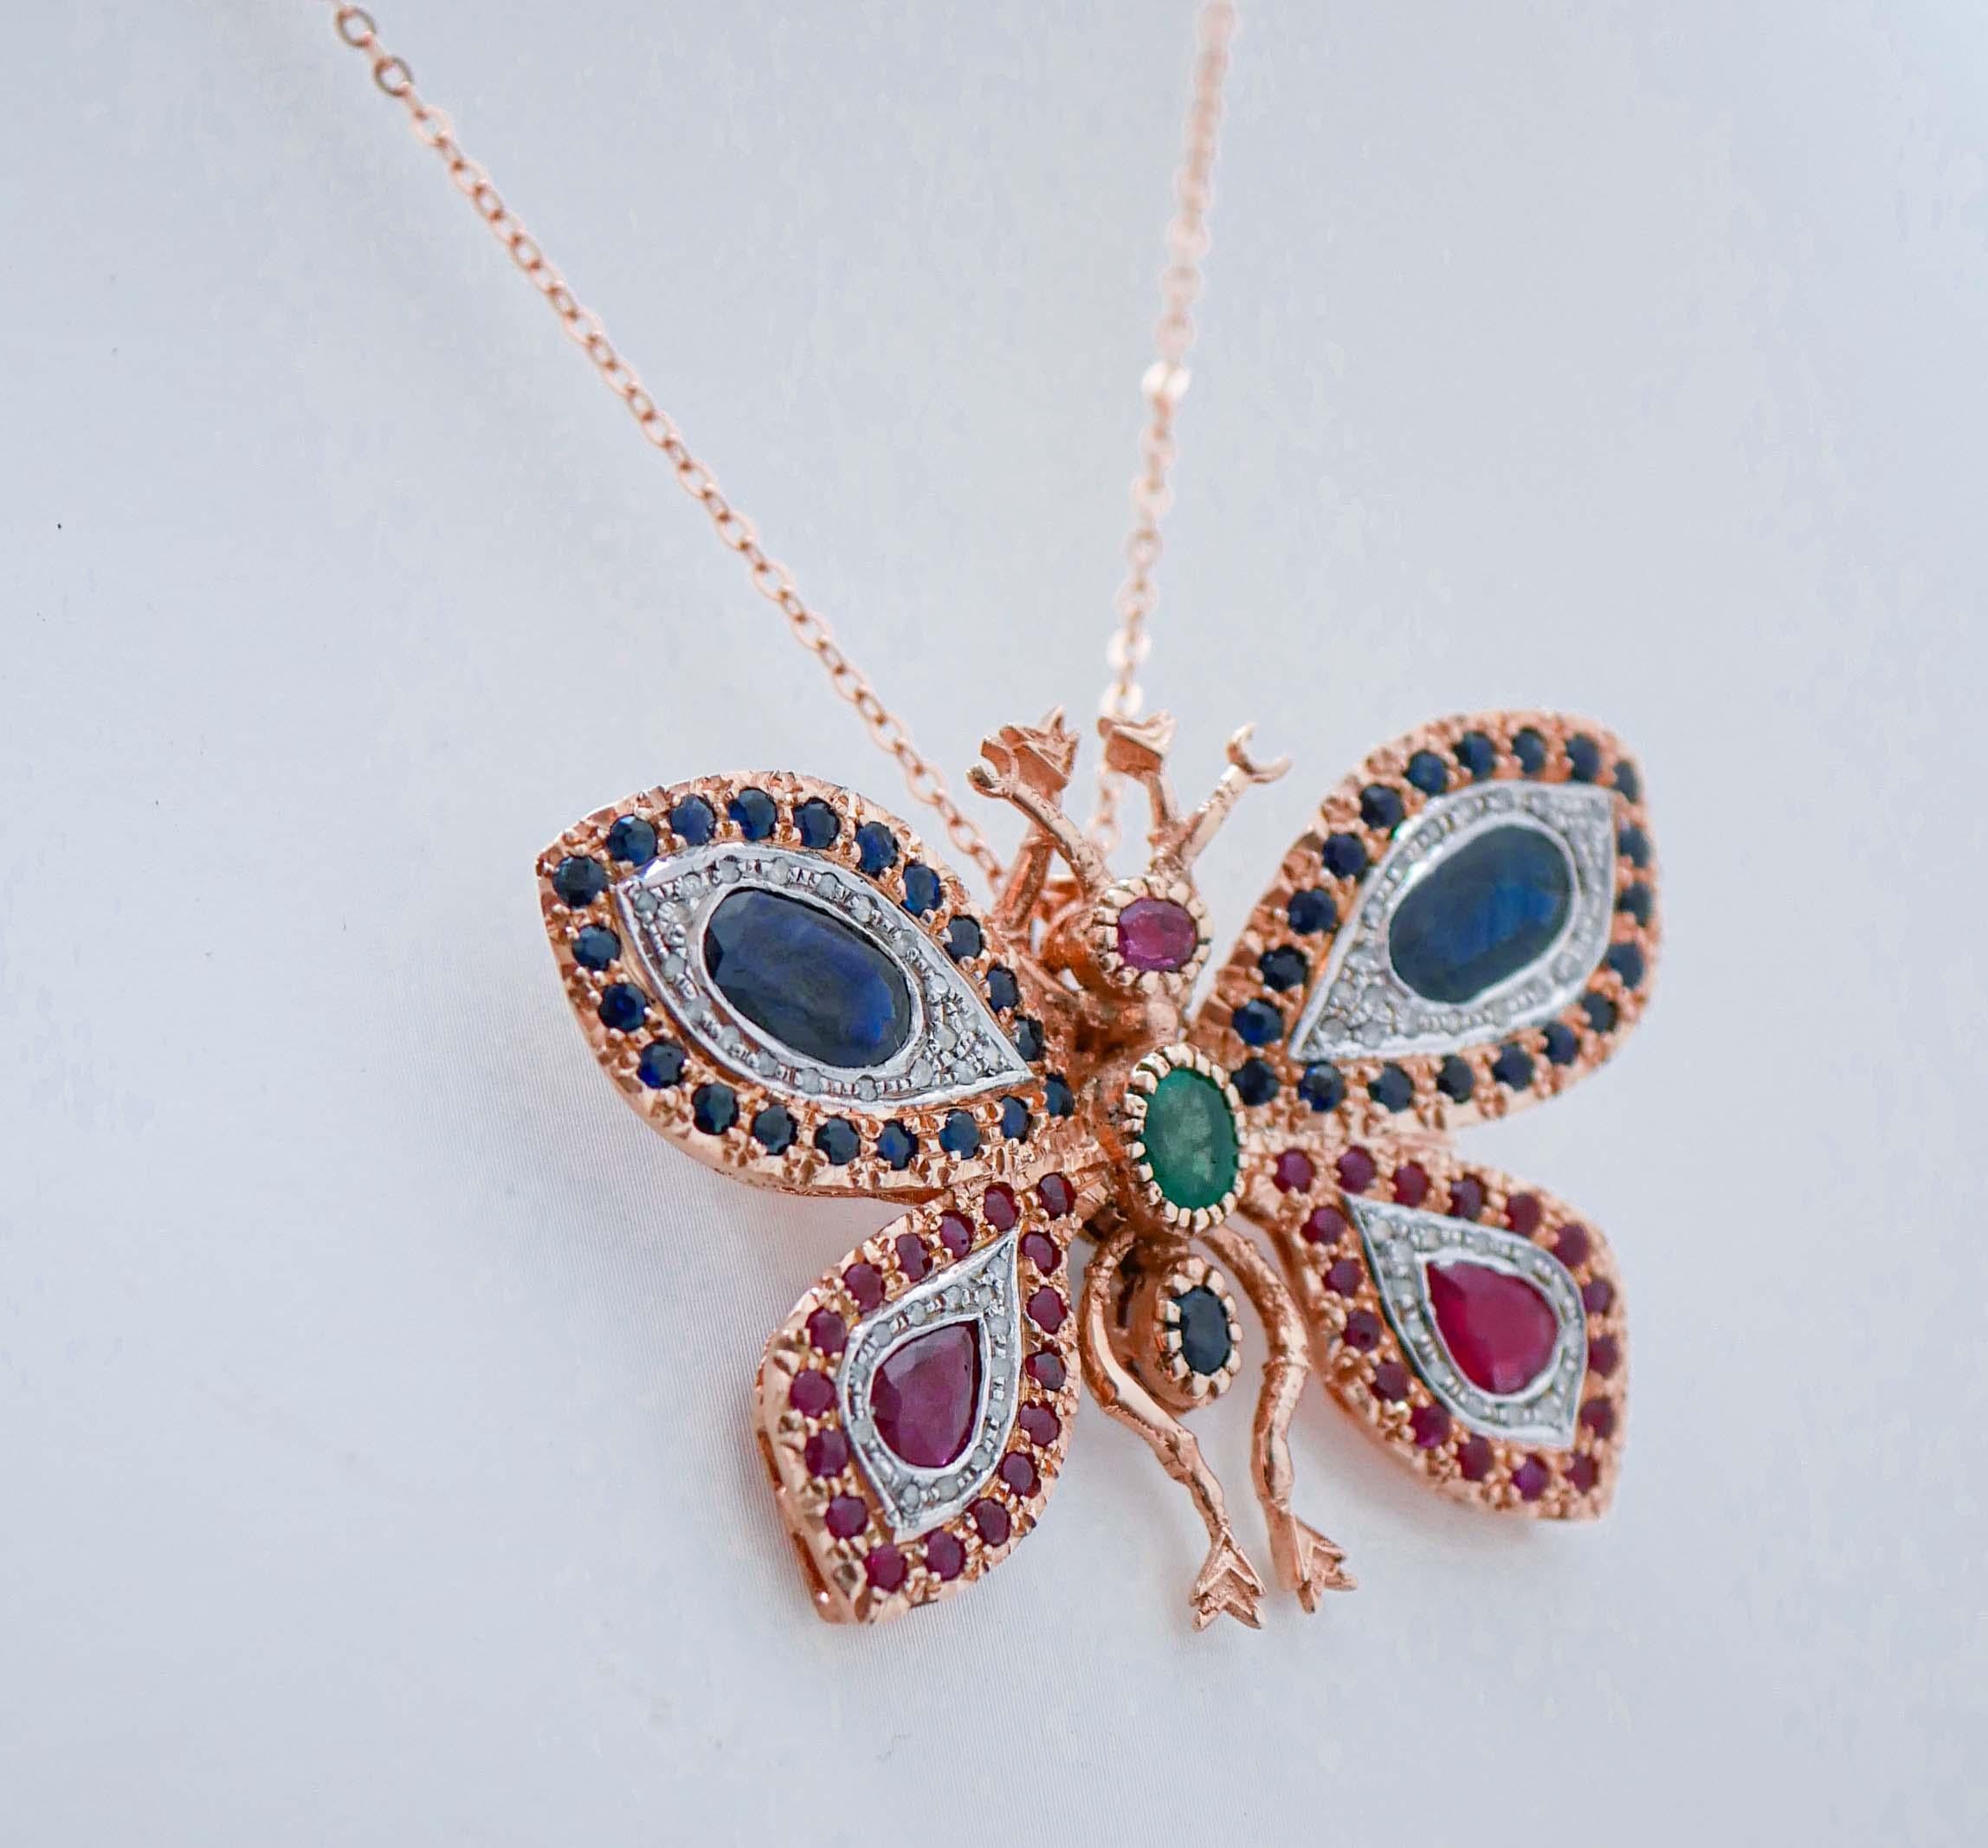 Retro Sapphires, Rubies, Emerald, Diamonds, Rose Gold and Silver Brooch/Pendant. For Sale